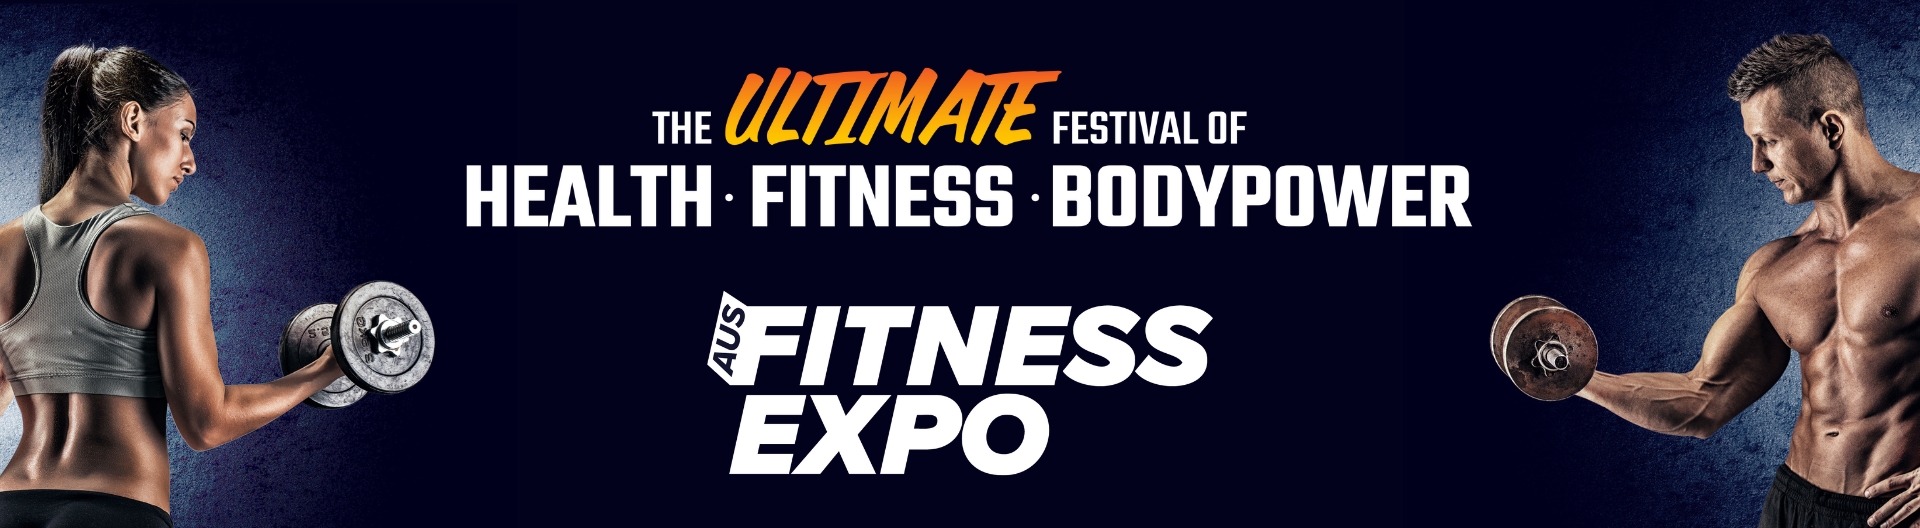 AusFitness Expo is coming to ICC Sydney on 11 to 13 October 2024.